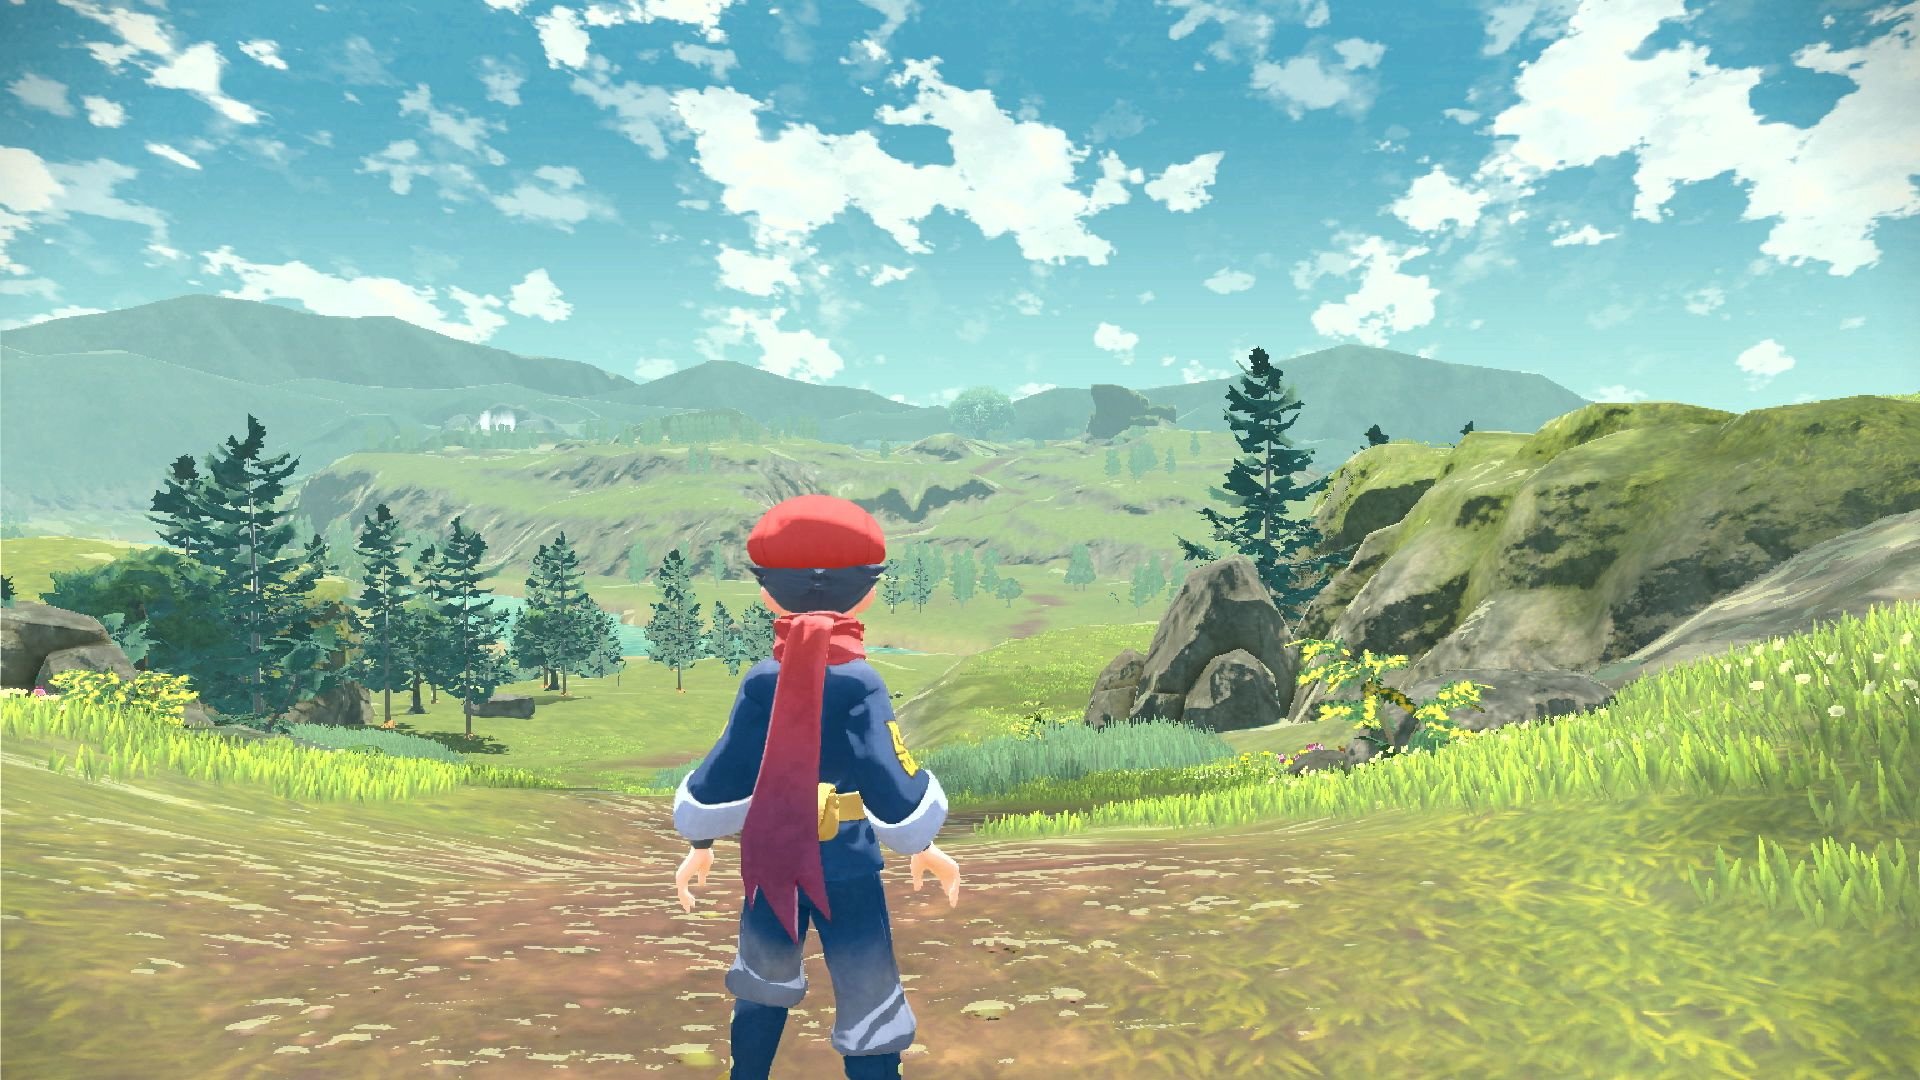 Pokémon Switch games: Pokémon Legends Arceus. Image shows a trainer standing before the sprawling wilderness of ancient Sinnoh